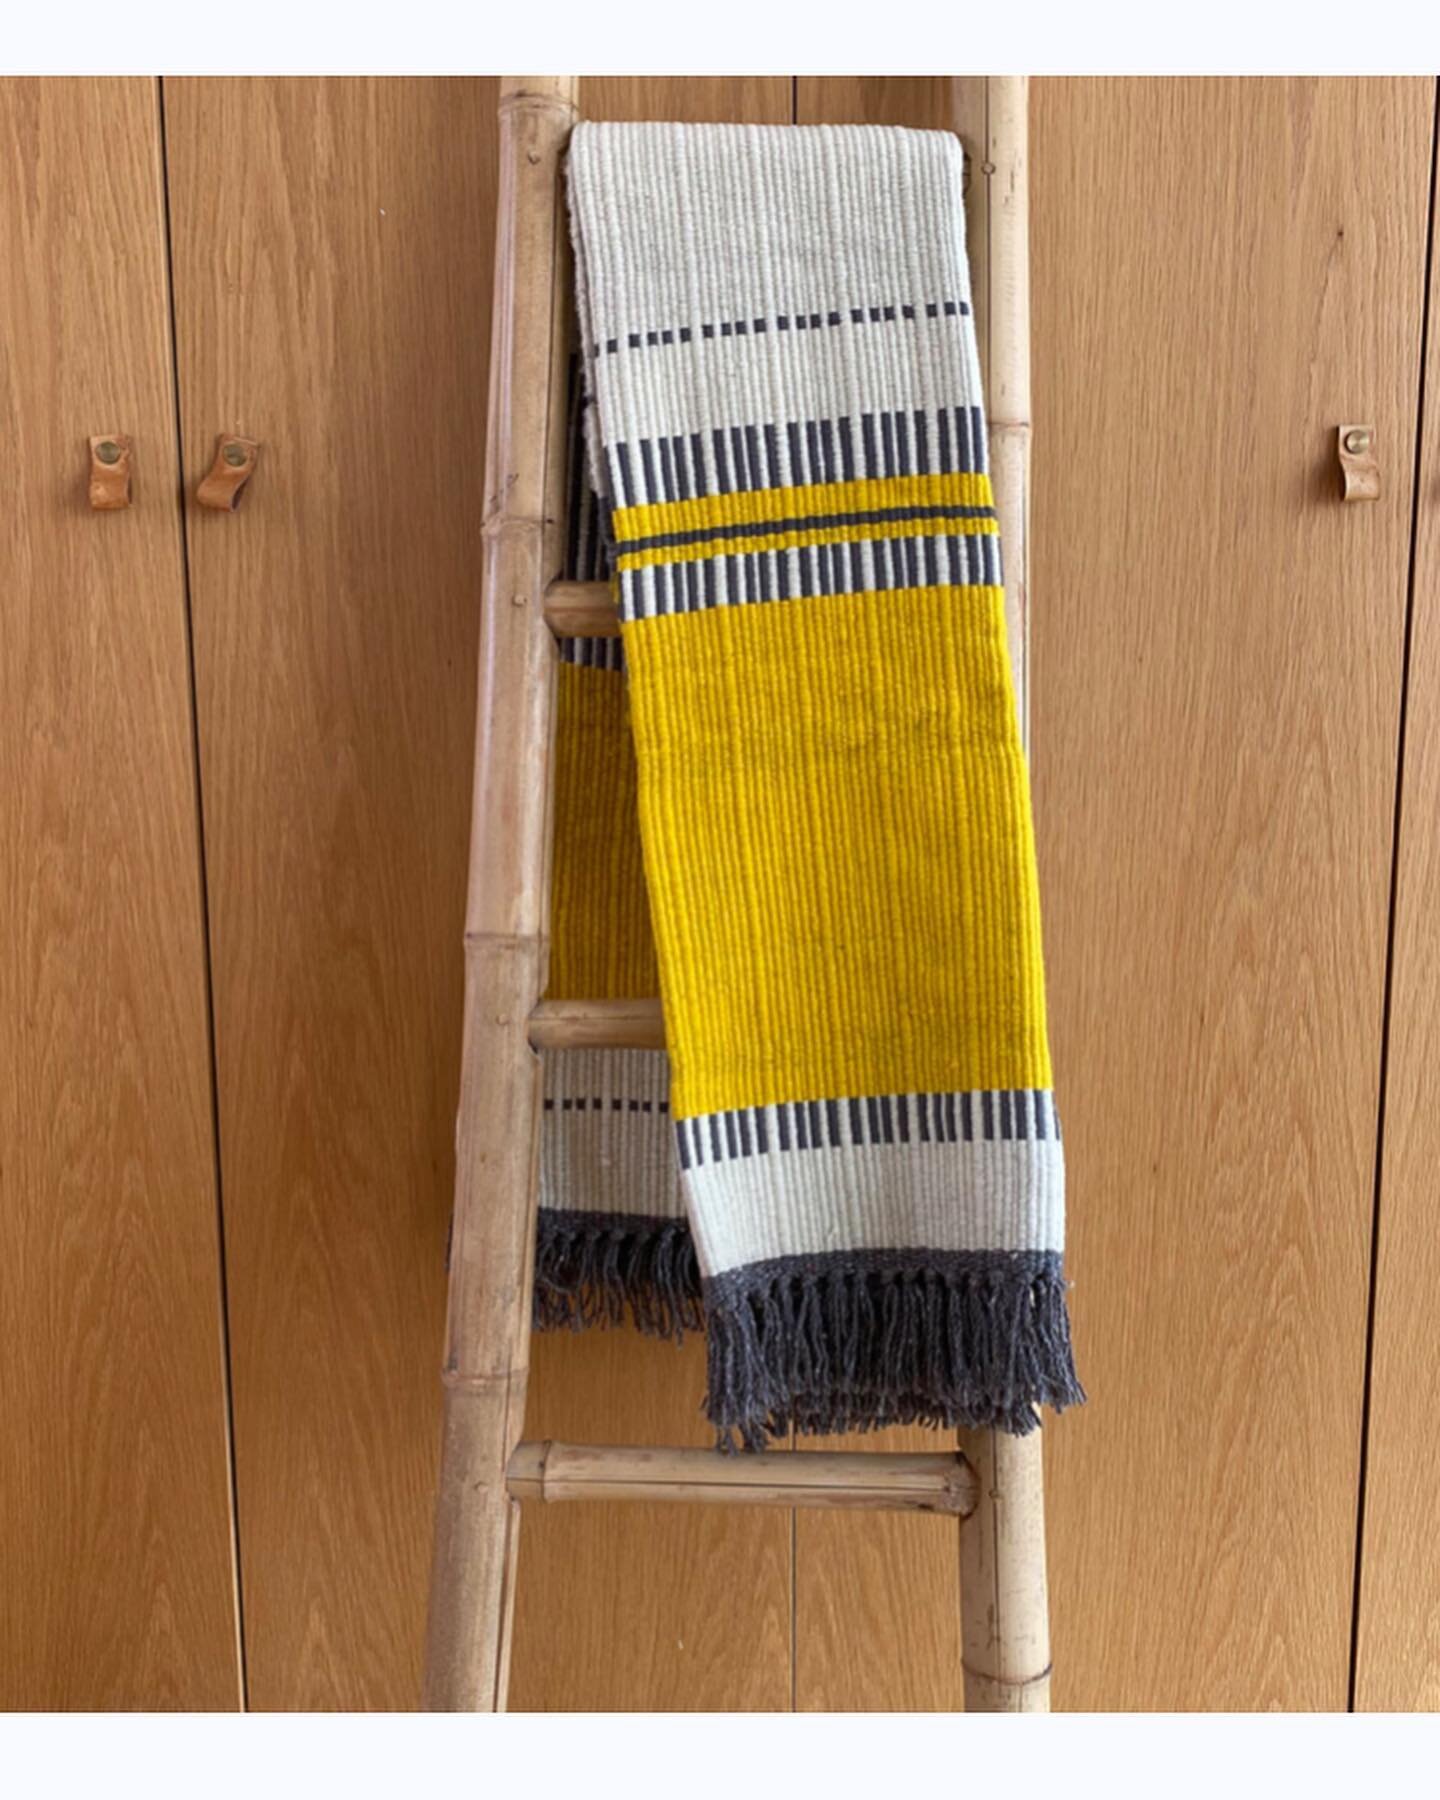 These beautiful 100% wool blankets are so sturdy they can be used as throws and even rugs. They are available on our online shop. 

They are handmade by the 4th generation of master weavers in Portugal still working on manual looms and we would never